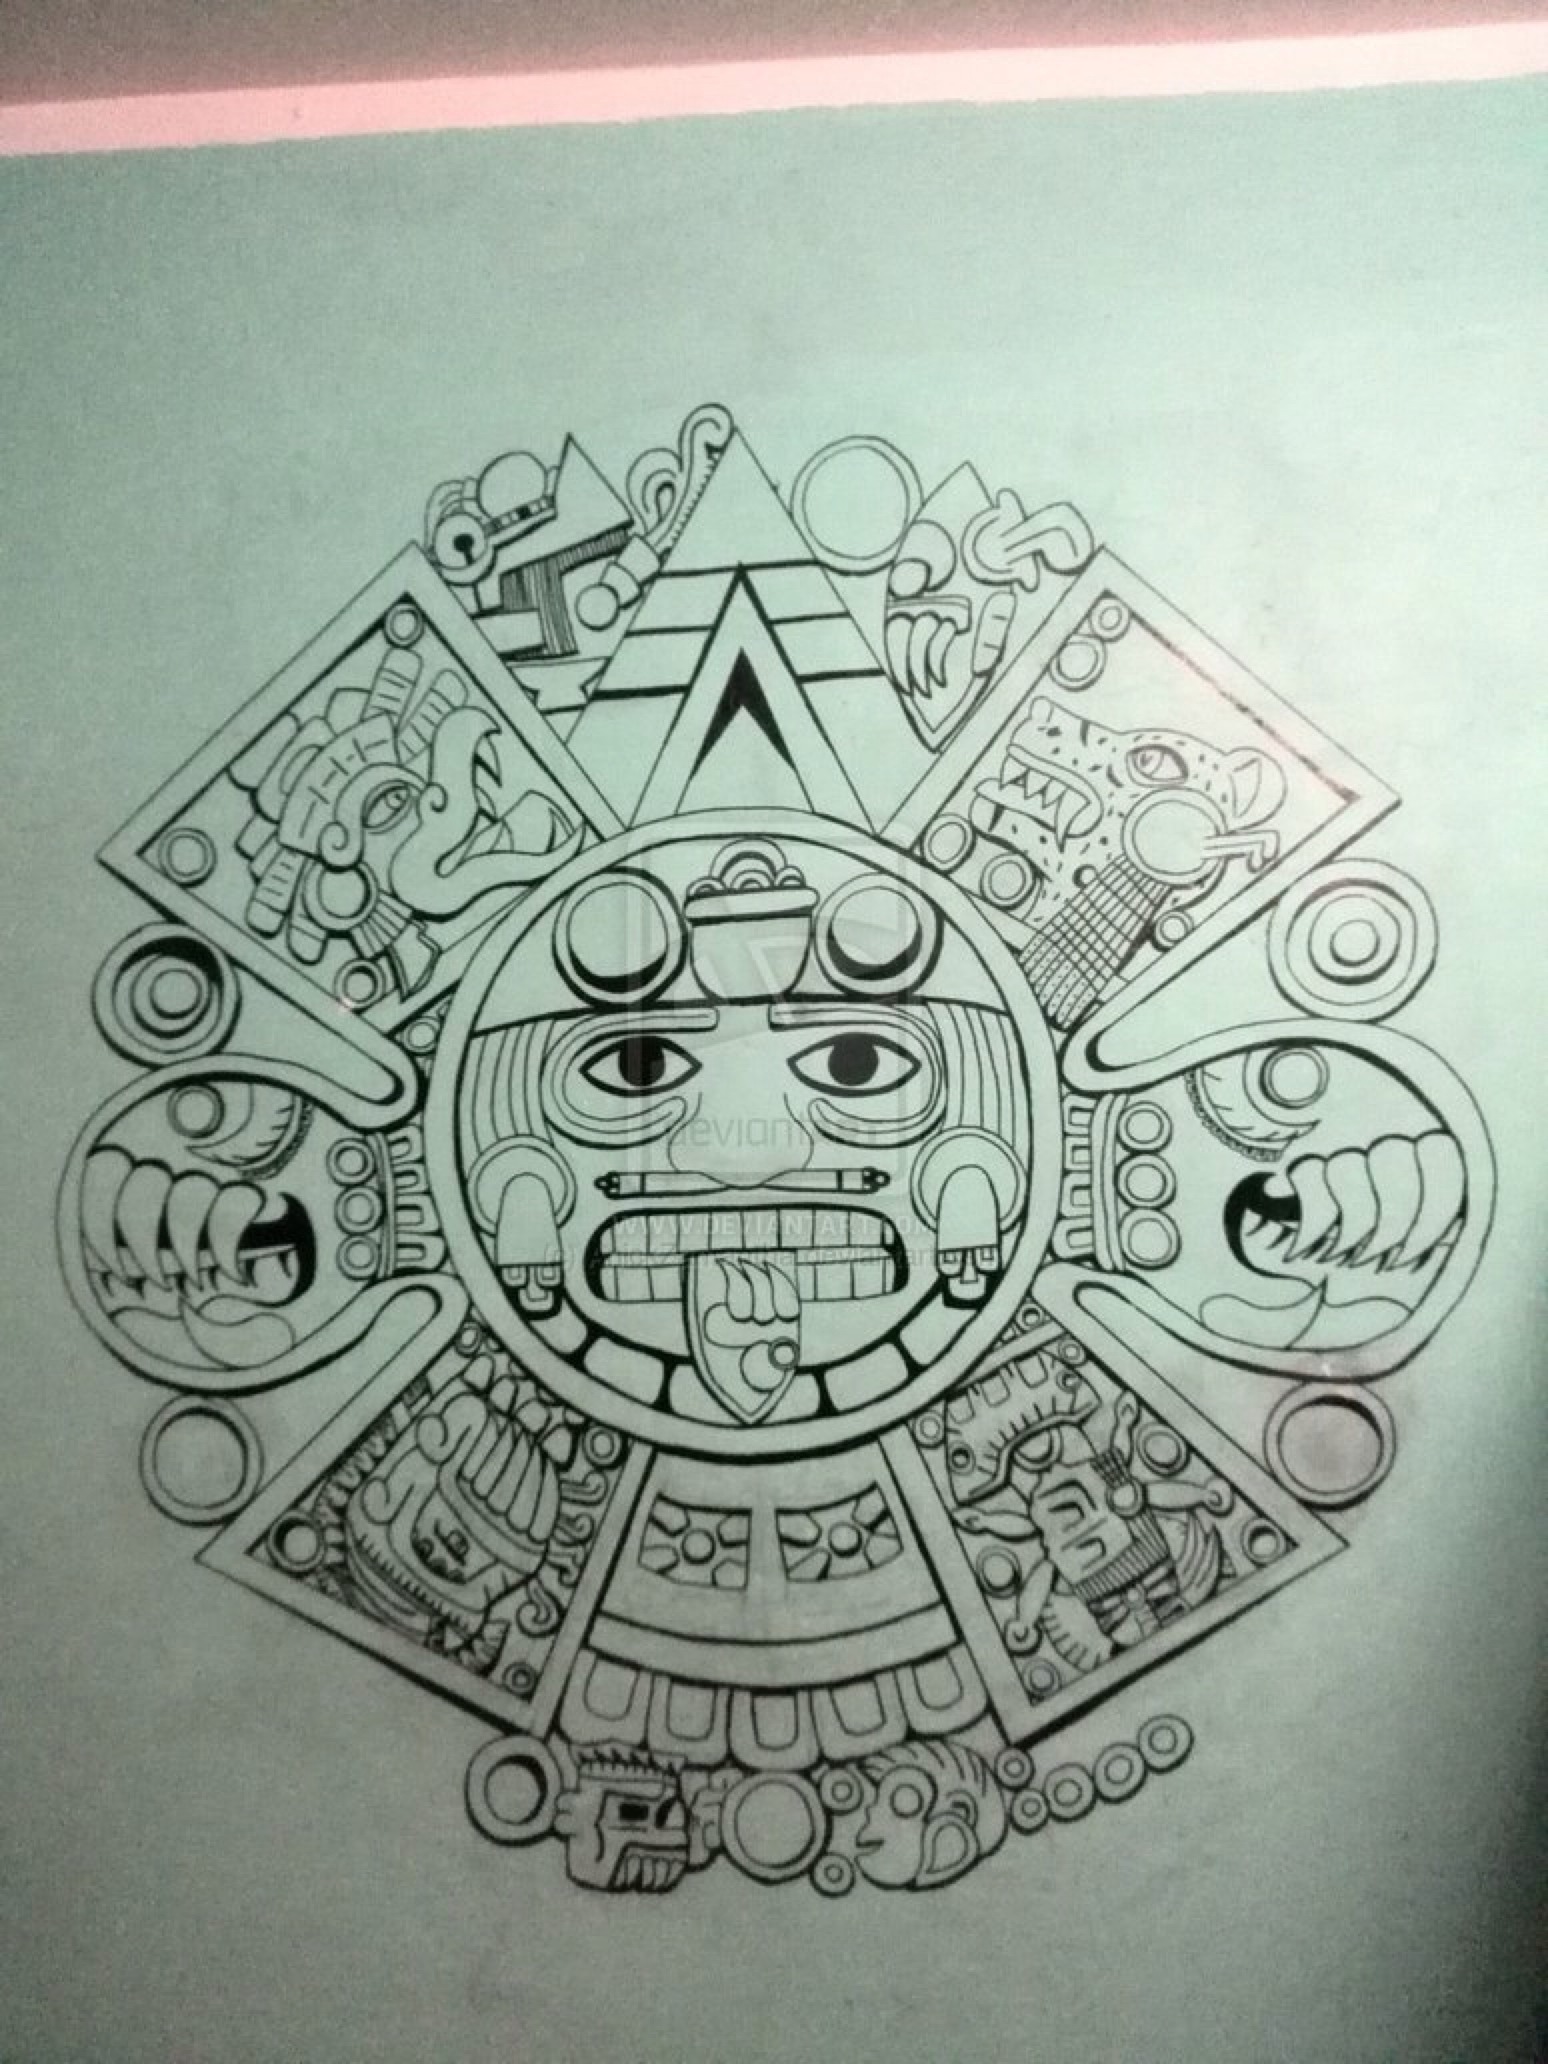 Aztec Calendar Drawing at GetDrawings com Free for personal use Aztec